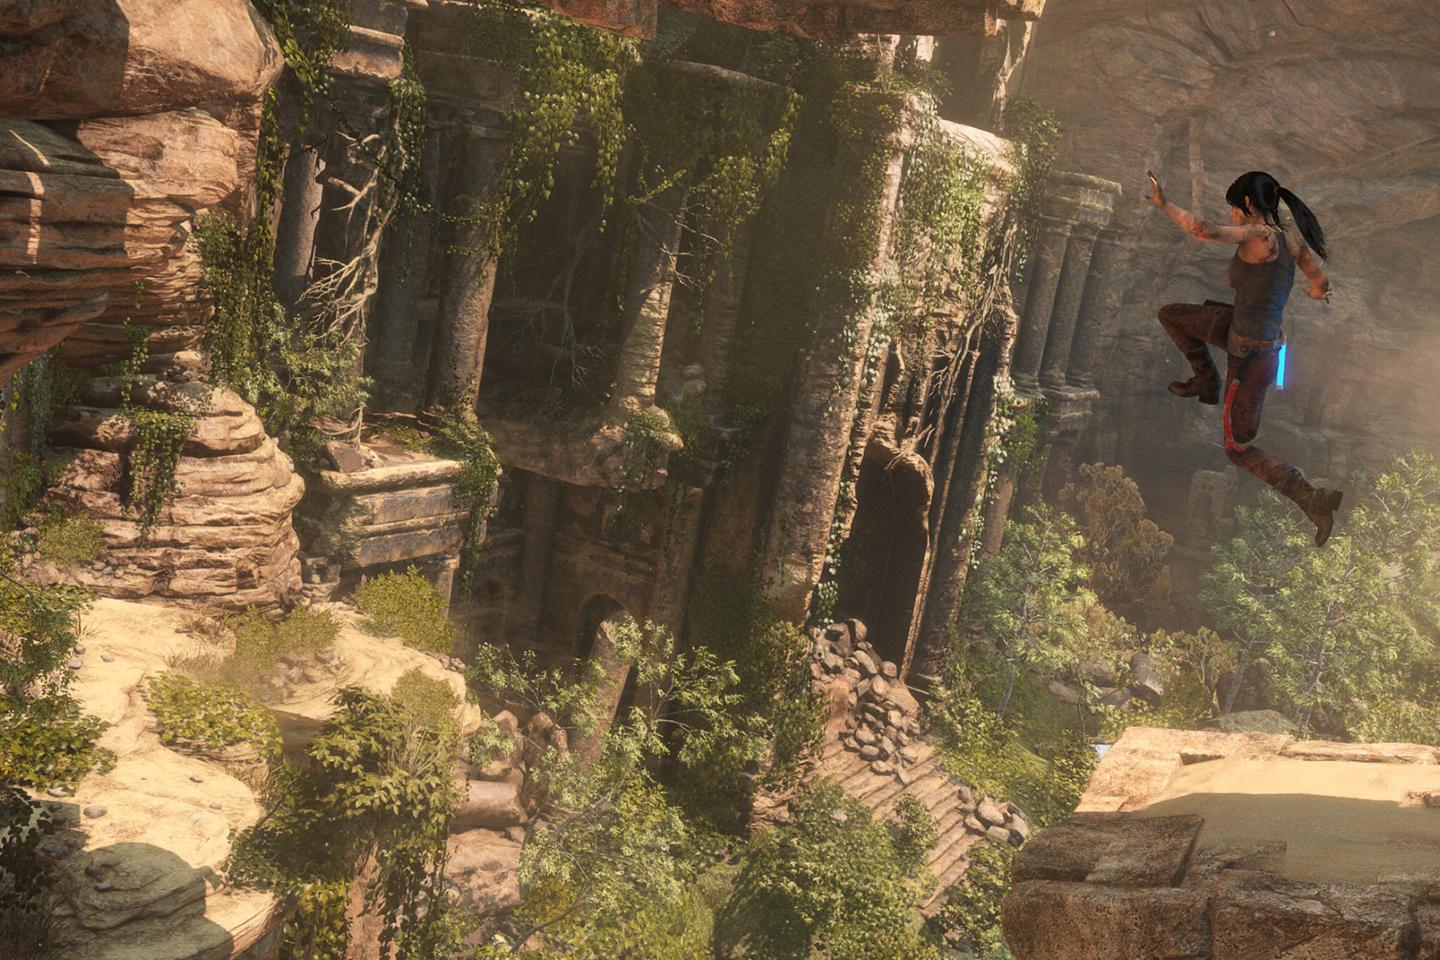 Dynamic action shot from a Tomb Raider game showing Lara Croft mid-leap across a vast canyon with ancient ruins and lush greenery in the background.